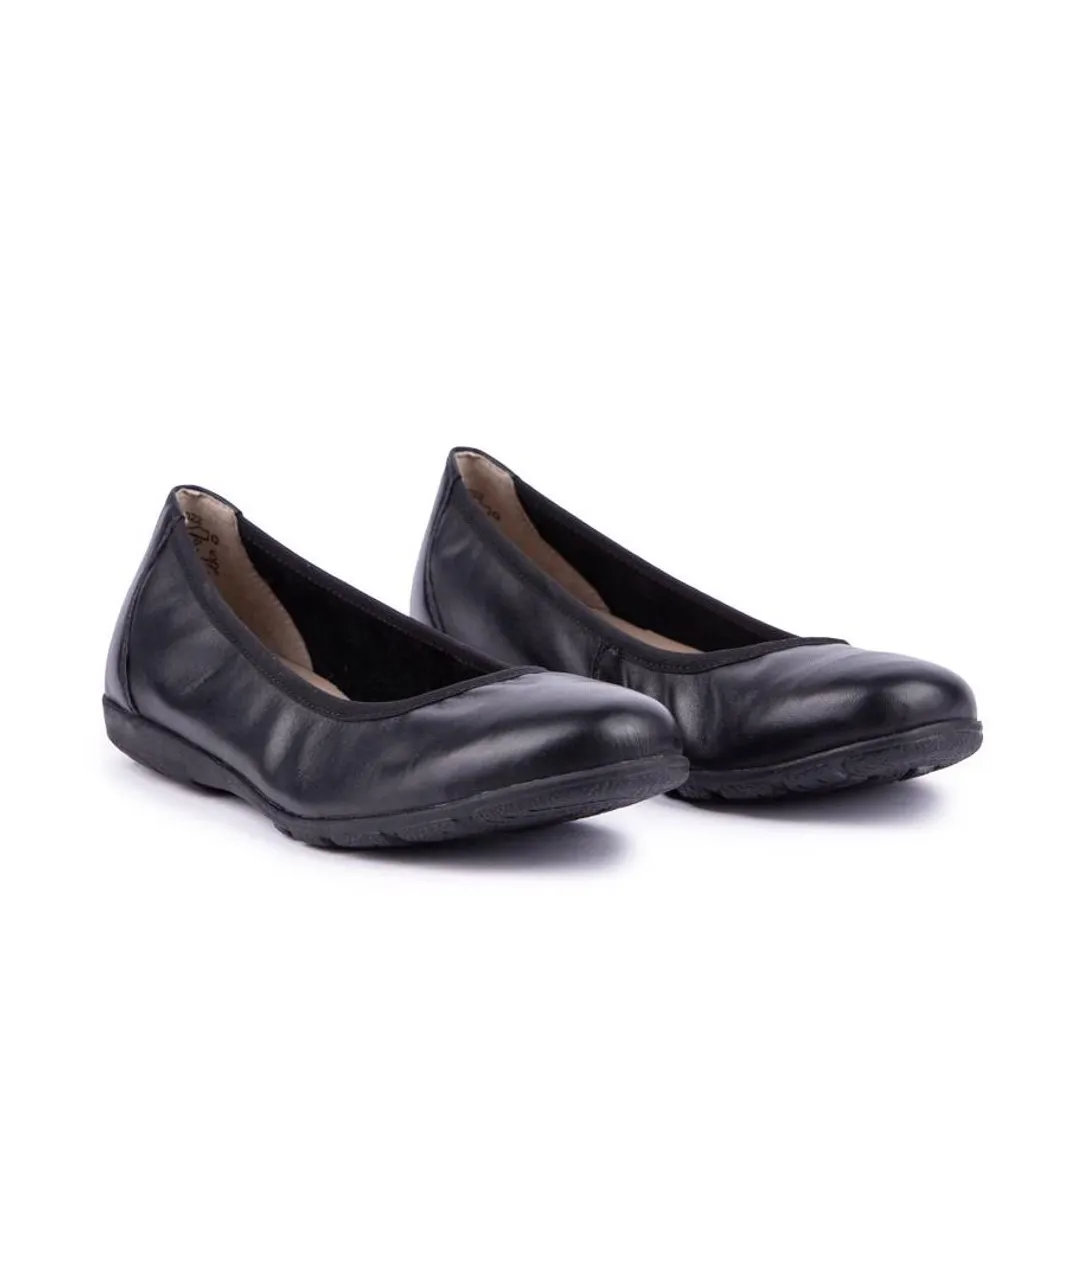 By Caprice Womens Leather Shoes - Black